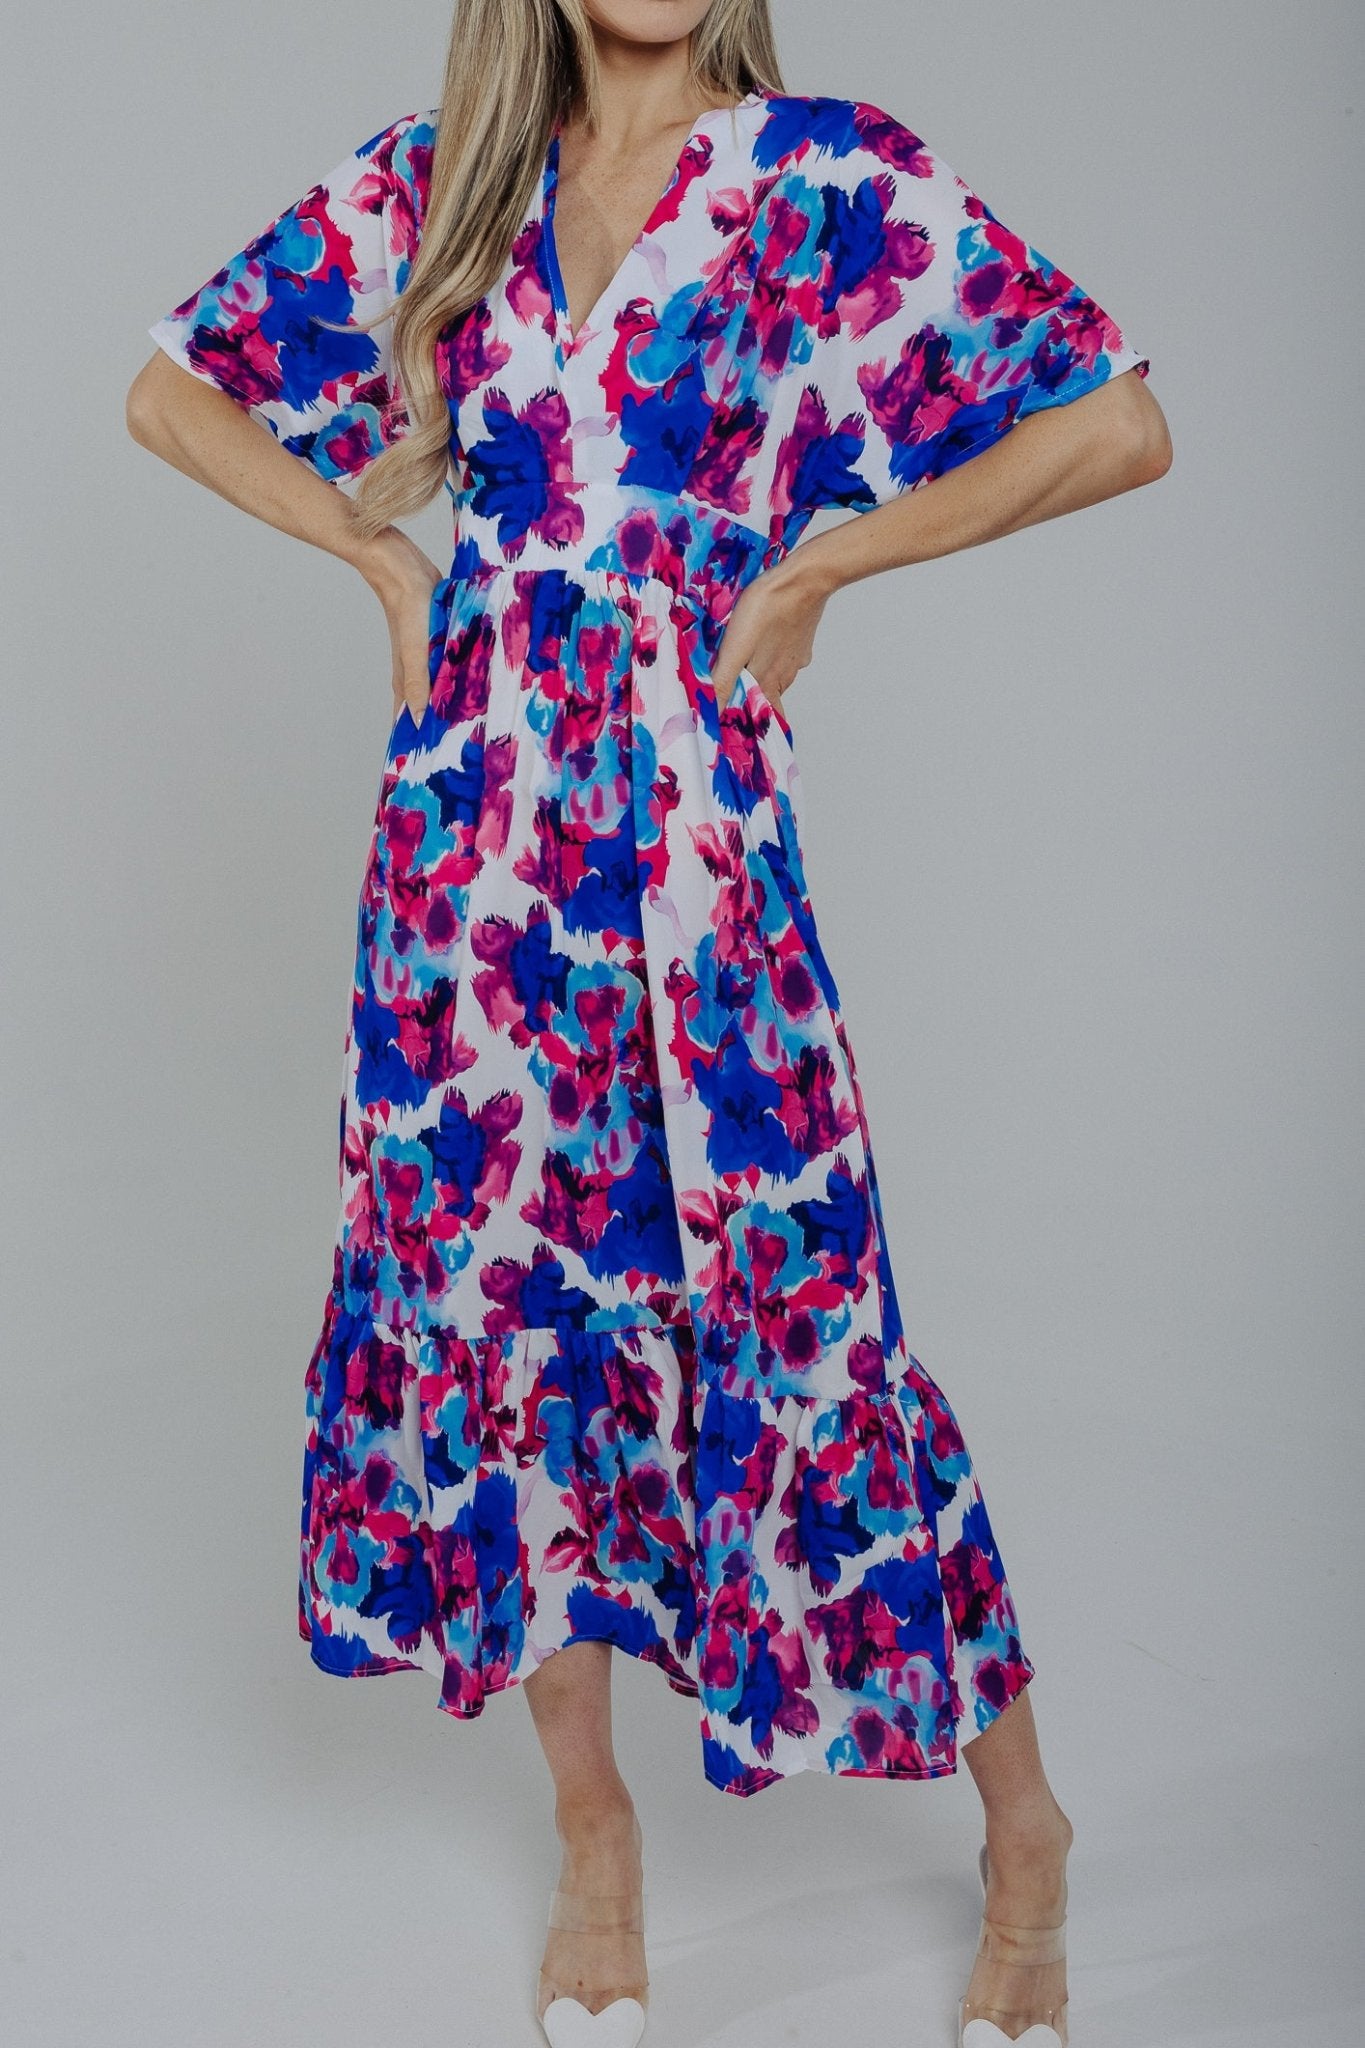 Polly Floral Midi Dress In Blue Mix - The Walk in Wardrobe